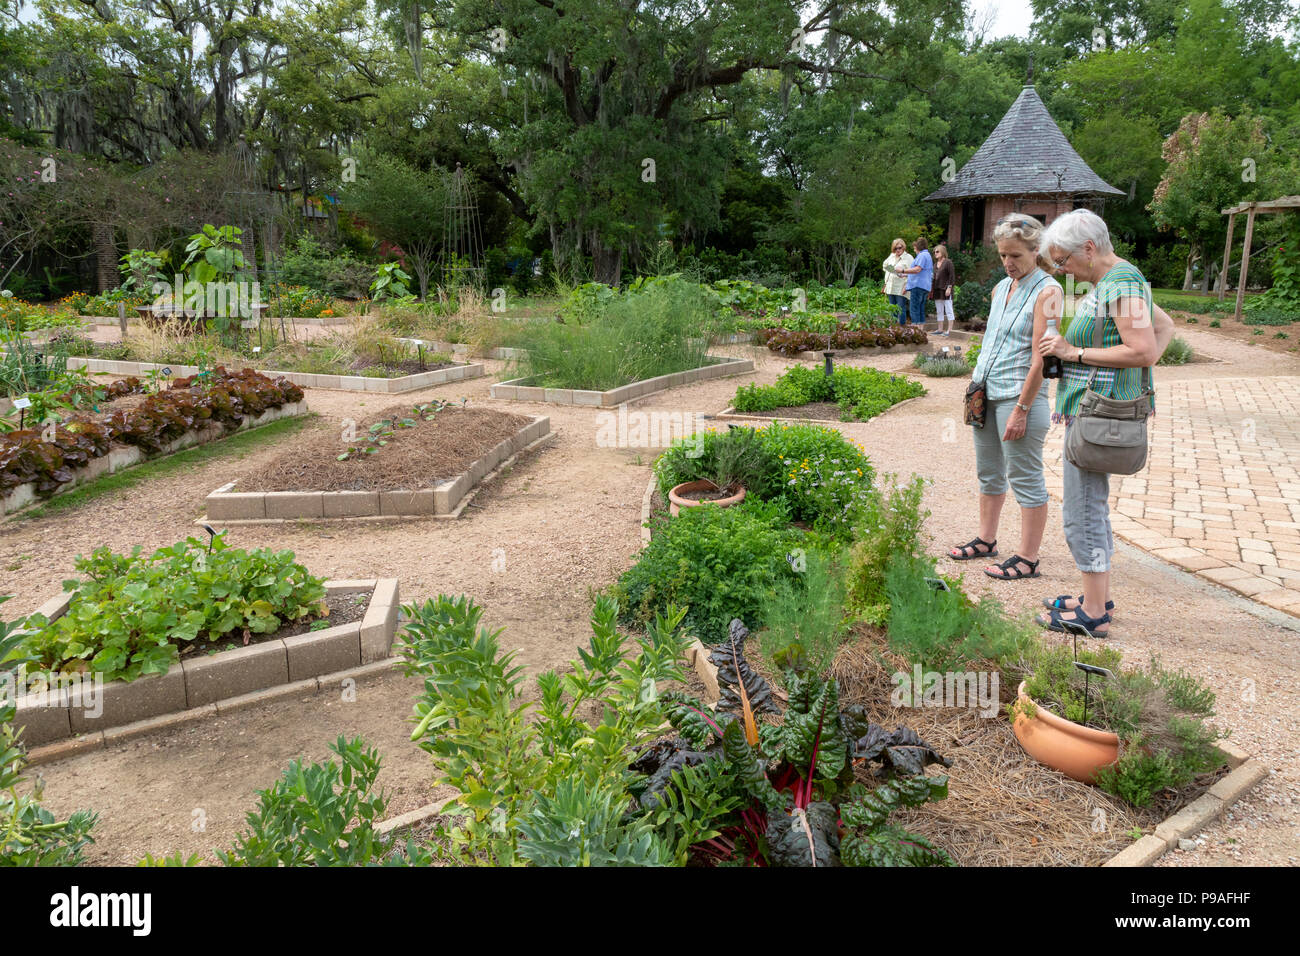 New Orleans Louisiana The Plano Demonstration Garden In The New